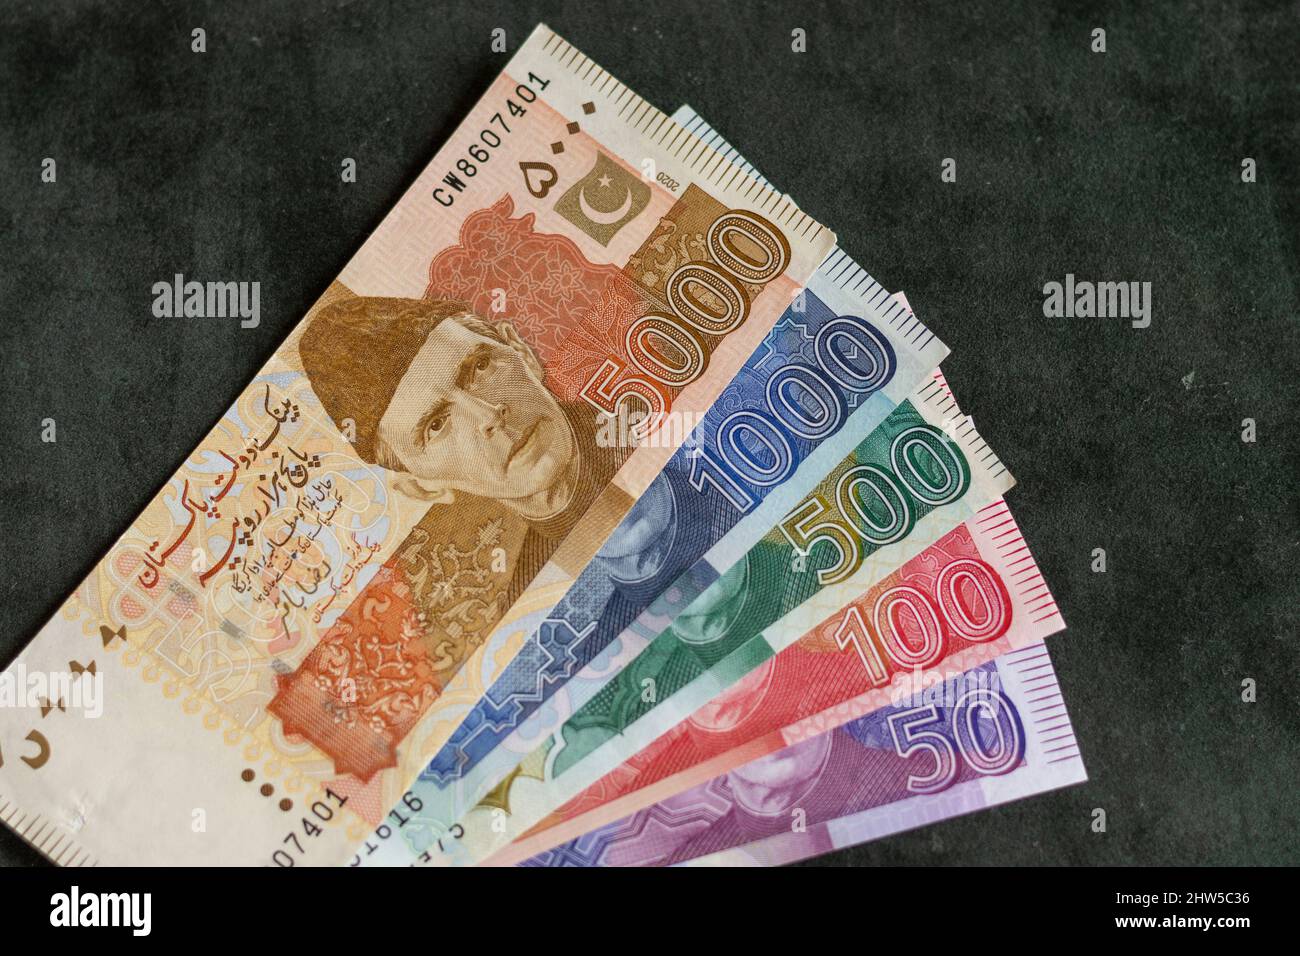 Banknotes set of Pakistani currency Stock Photo